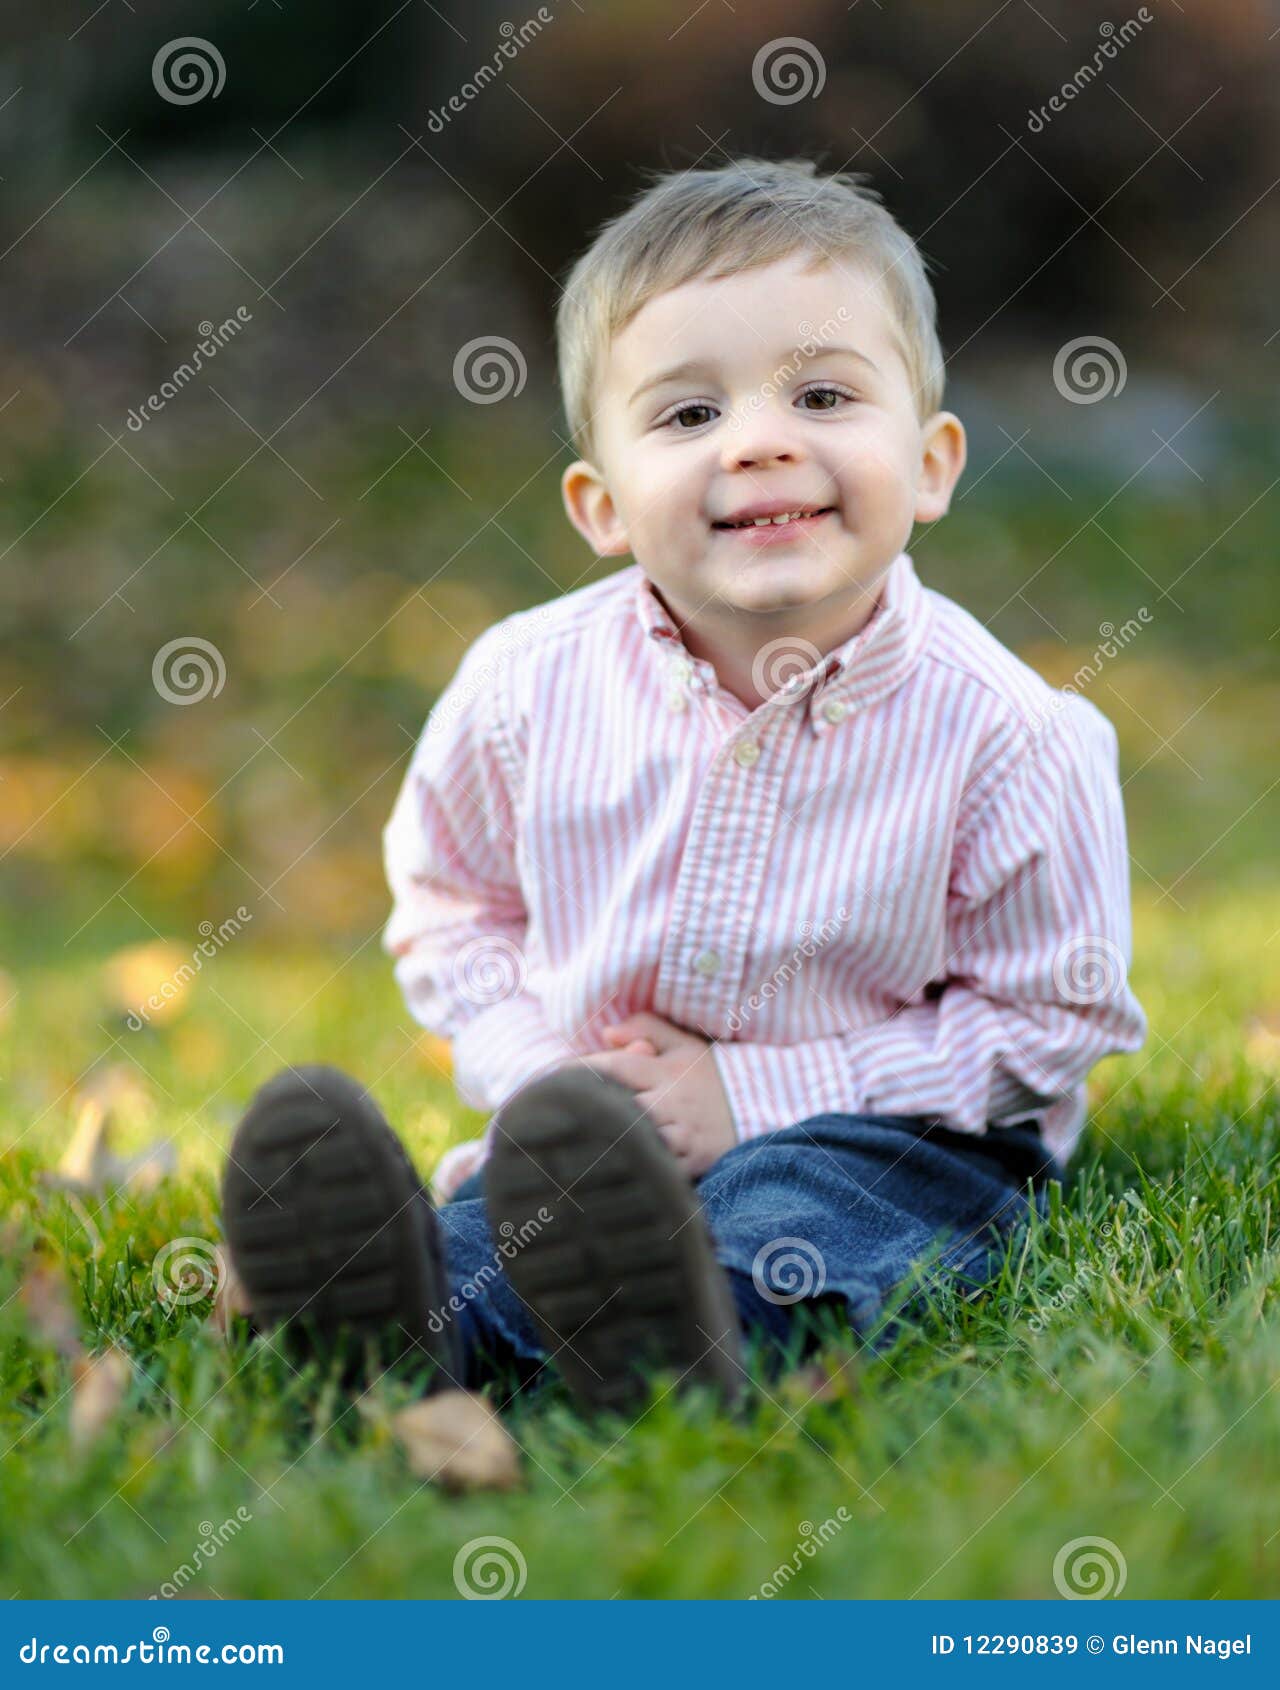 Smiling young boy on grass stock image. Image of caucasian - 12290839